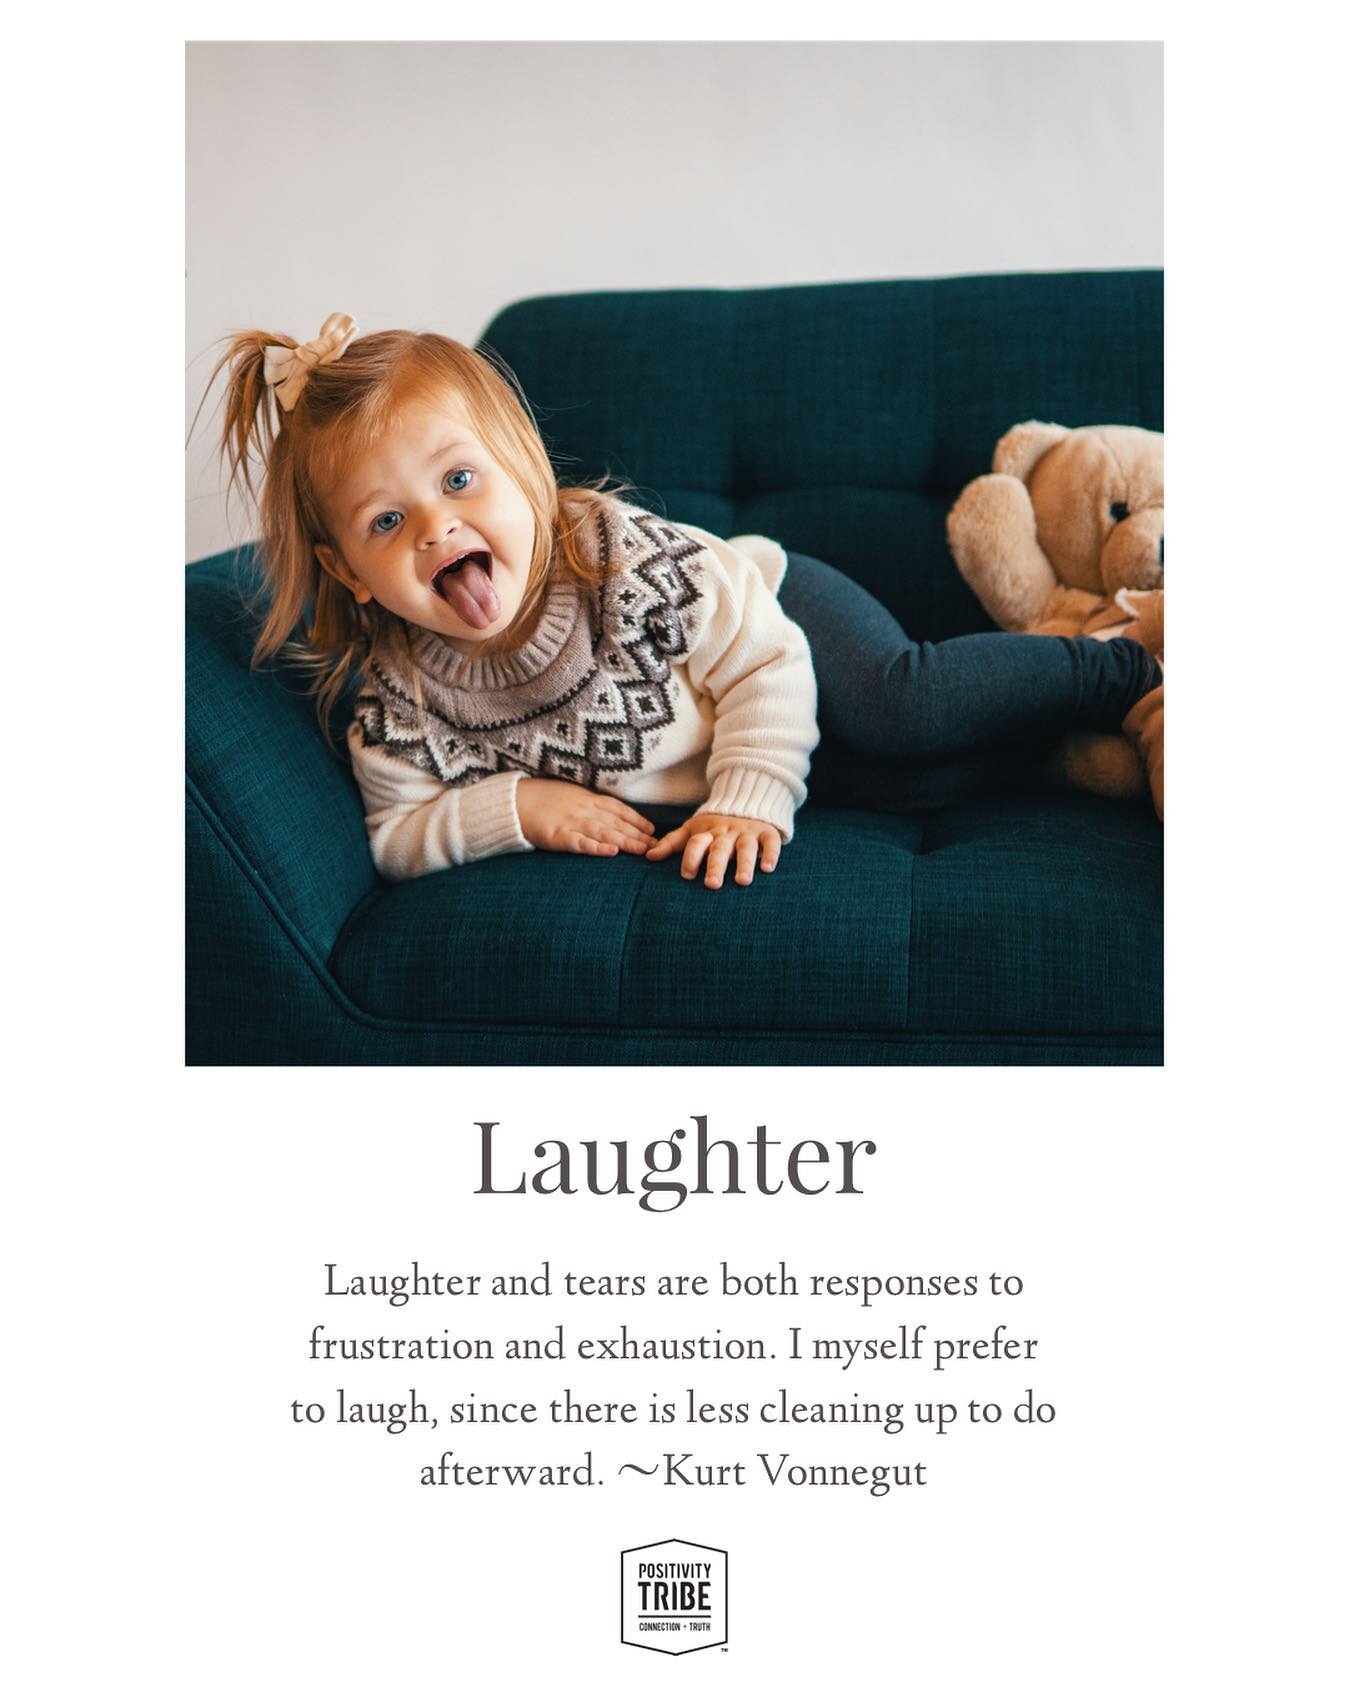 Laughter and tears are both responses to frustration and exhaustion. I myself prefer to laugh, since there is less cleaning up to do afterward. ~Kurt Vonnegut 

Remember to Claim Your Moment. Add PT, share, and/ or repost if inspired. 

#sharethismom